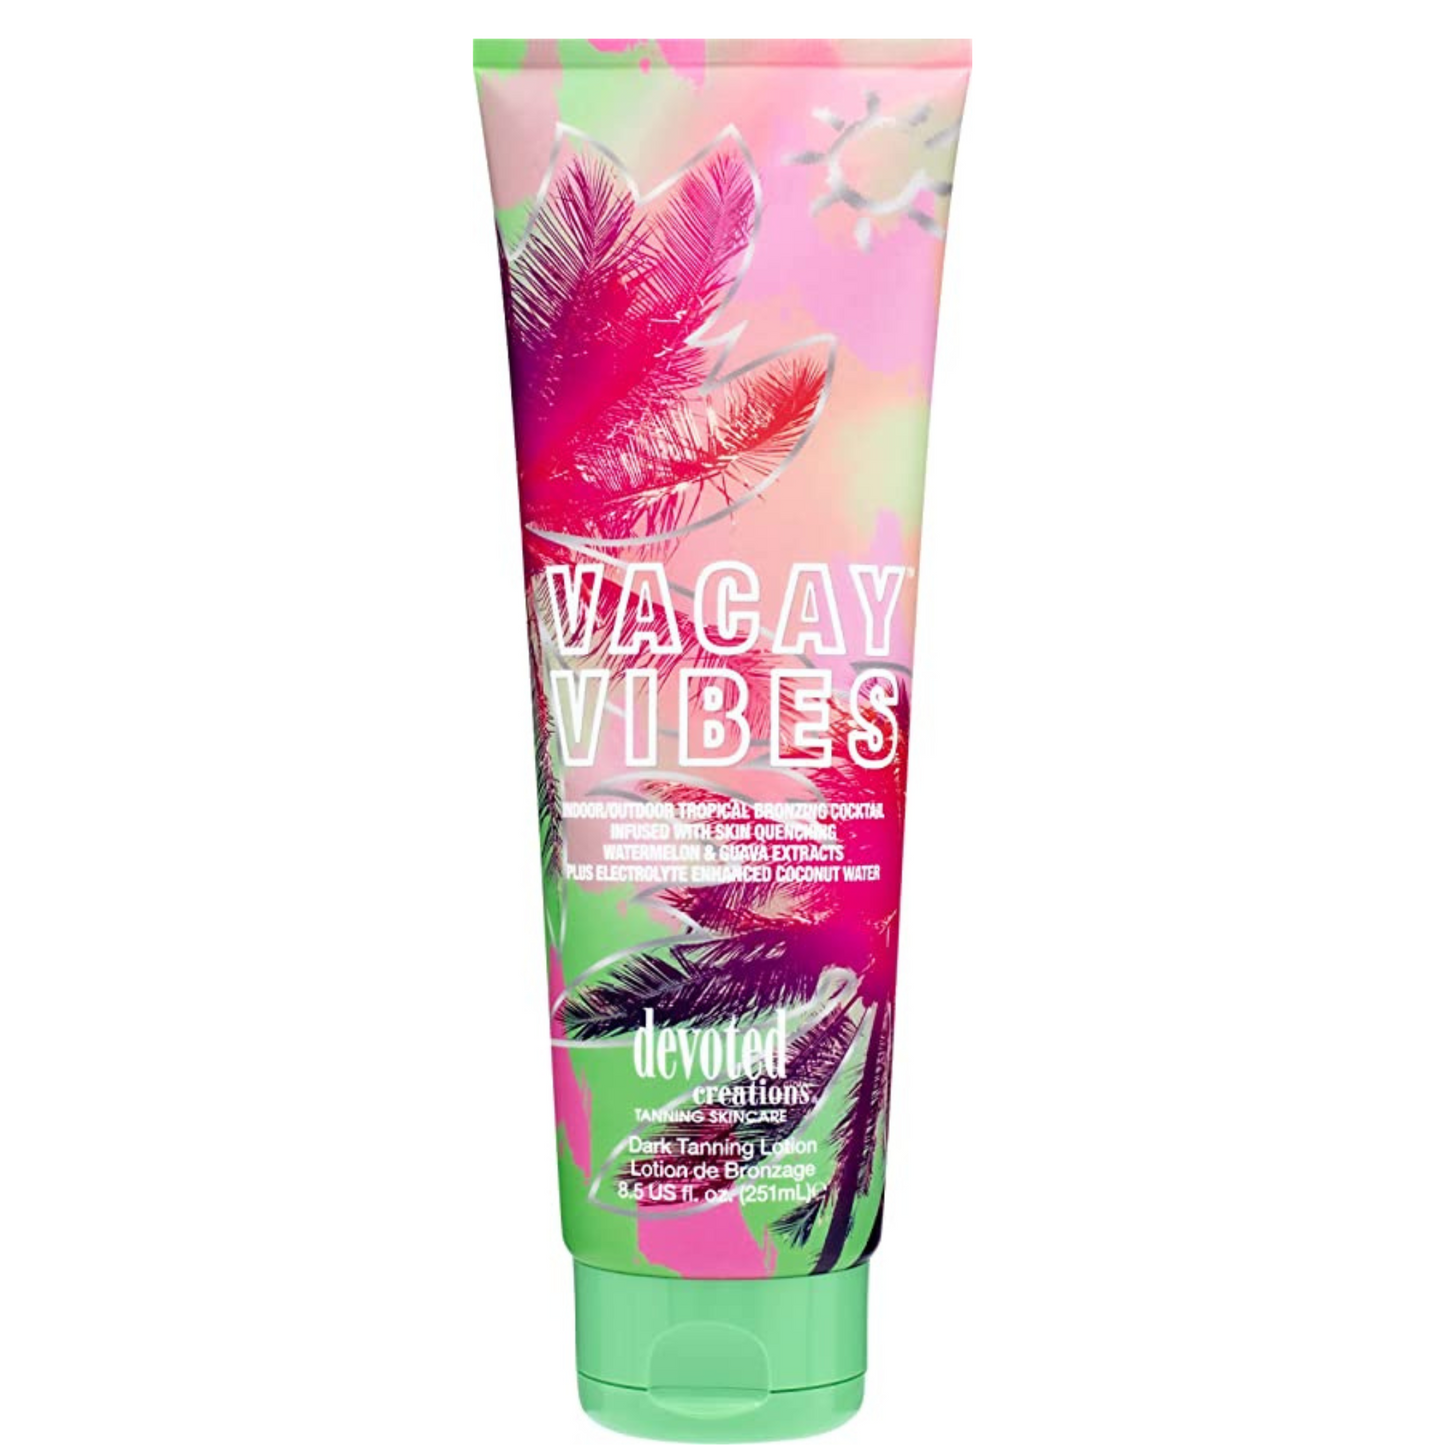 Vacay Vibes tanning lotion is your key to a glowing complexion. Its enriched bronzer formula helps to provide natural bronzing color while also delivering a radiant, even tan. With Vacay Vibes, you can enjoy the look of a sun-kissed vacation without spending days in the sun.